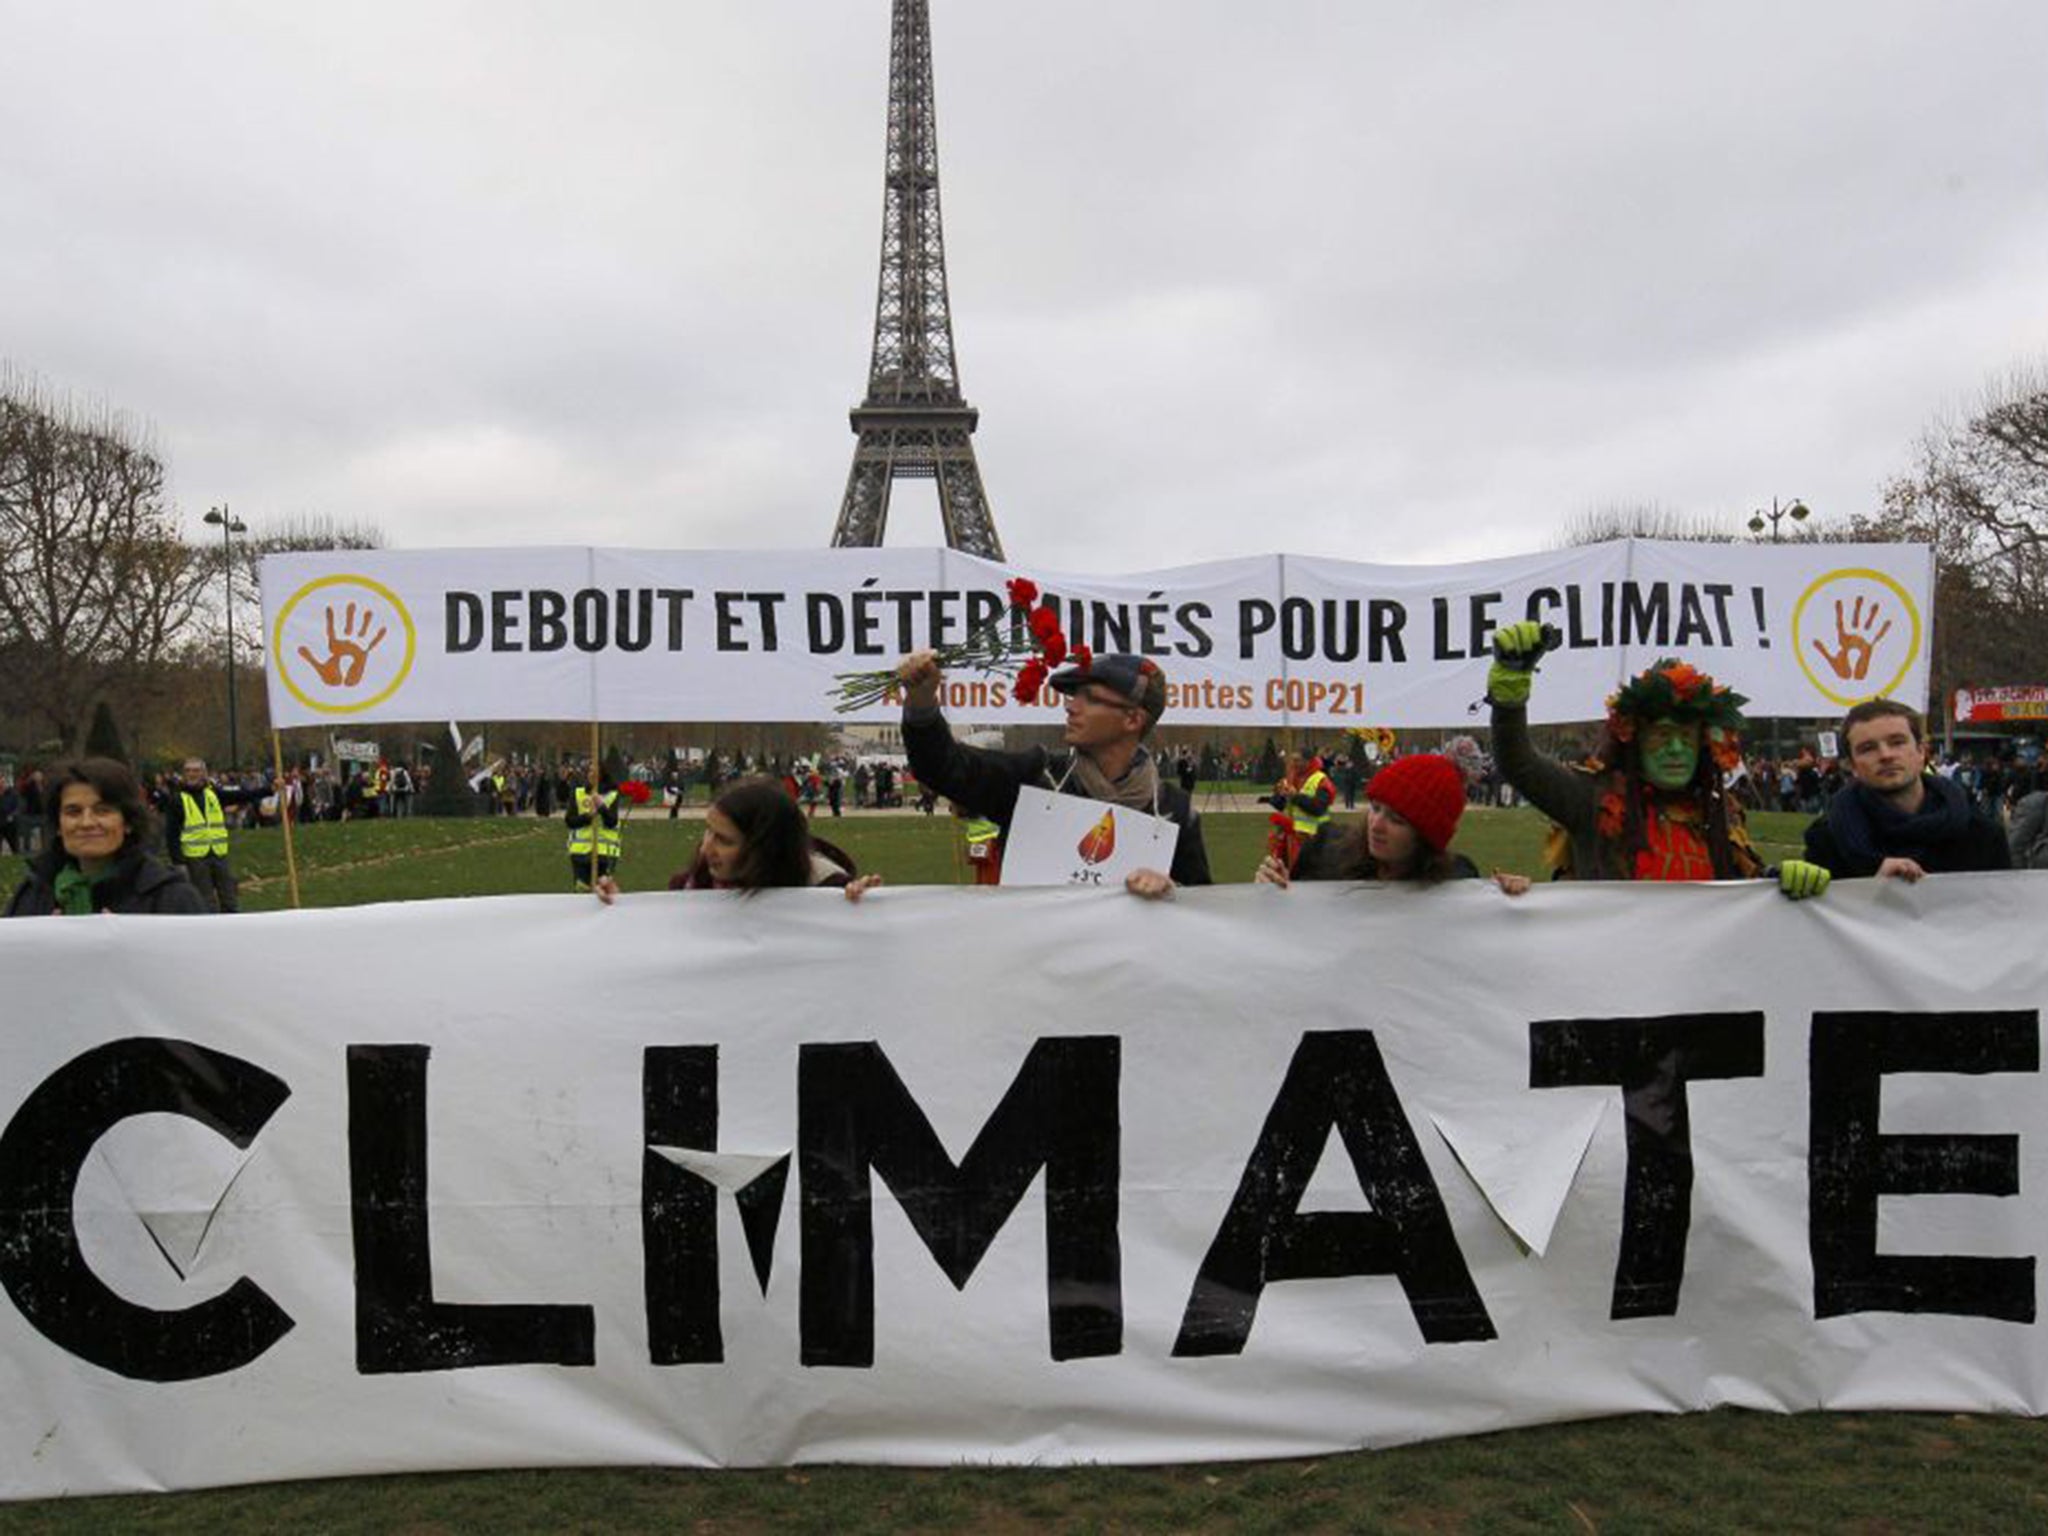 Environmentalists attend a demonstration near the Eiffel Tower in Paris, France, during the World Climate Change Conference 2015